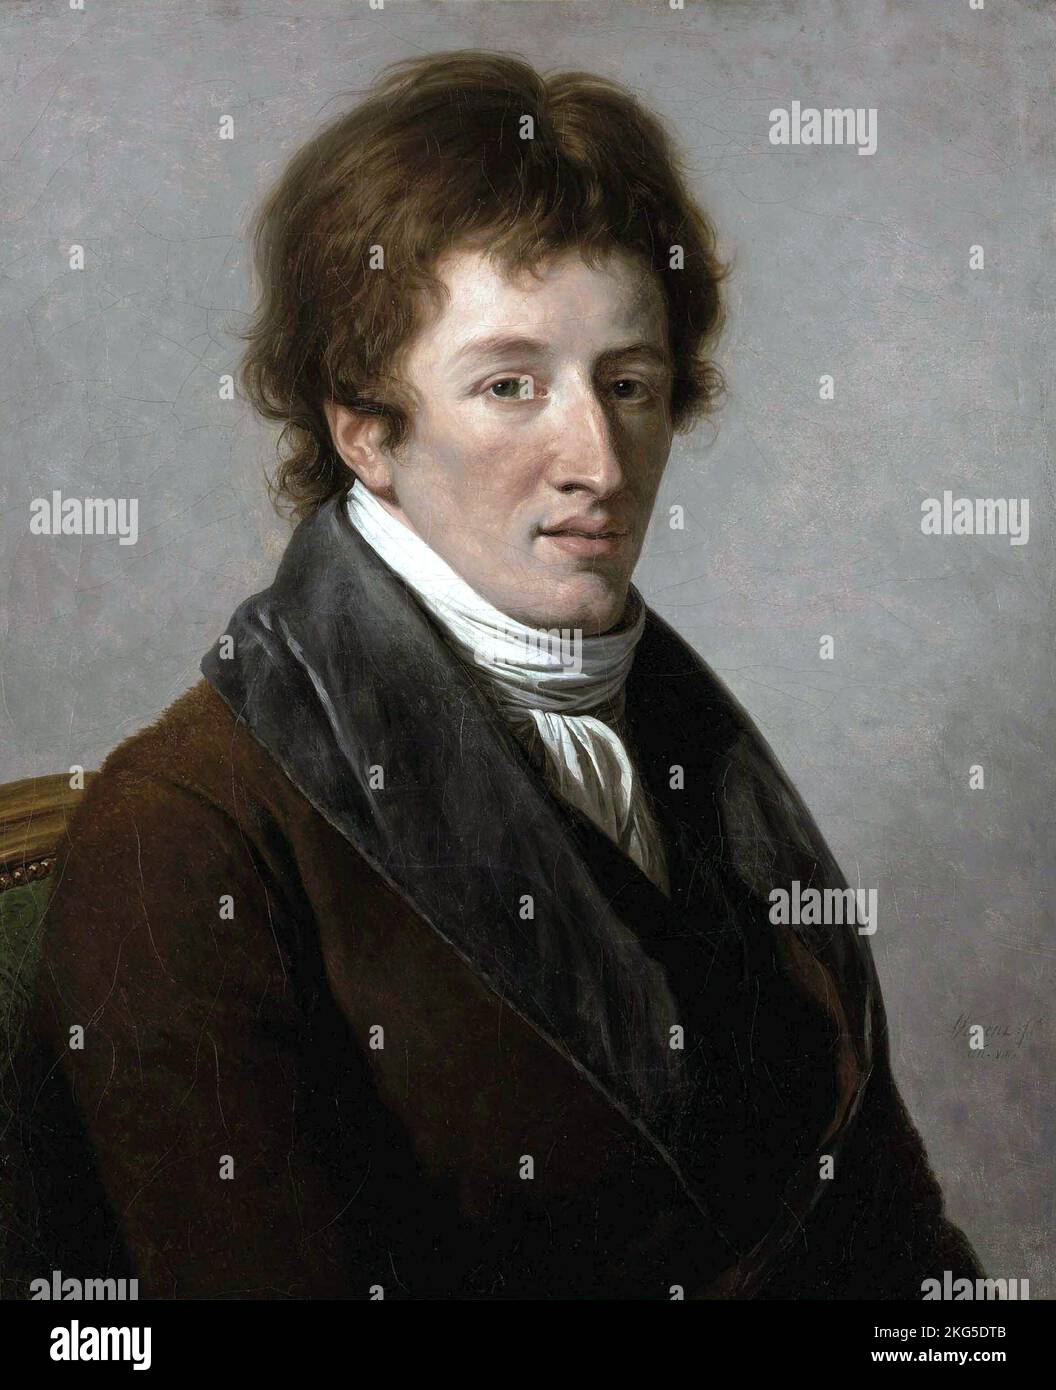 Baron Georges Cuvier (1769-1832) Portrait by François-André Vincent, 1795 Jean Léopold Nicolas Frédéric, Baron Cuvier, Jean Leopold Nicolas Frederic Cuvier (1769 – 1832), Georges Cuvier, French naturalist and zoologist, sometimes referred to as the 'founding father of paleontology'. Stock Photo